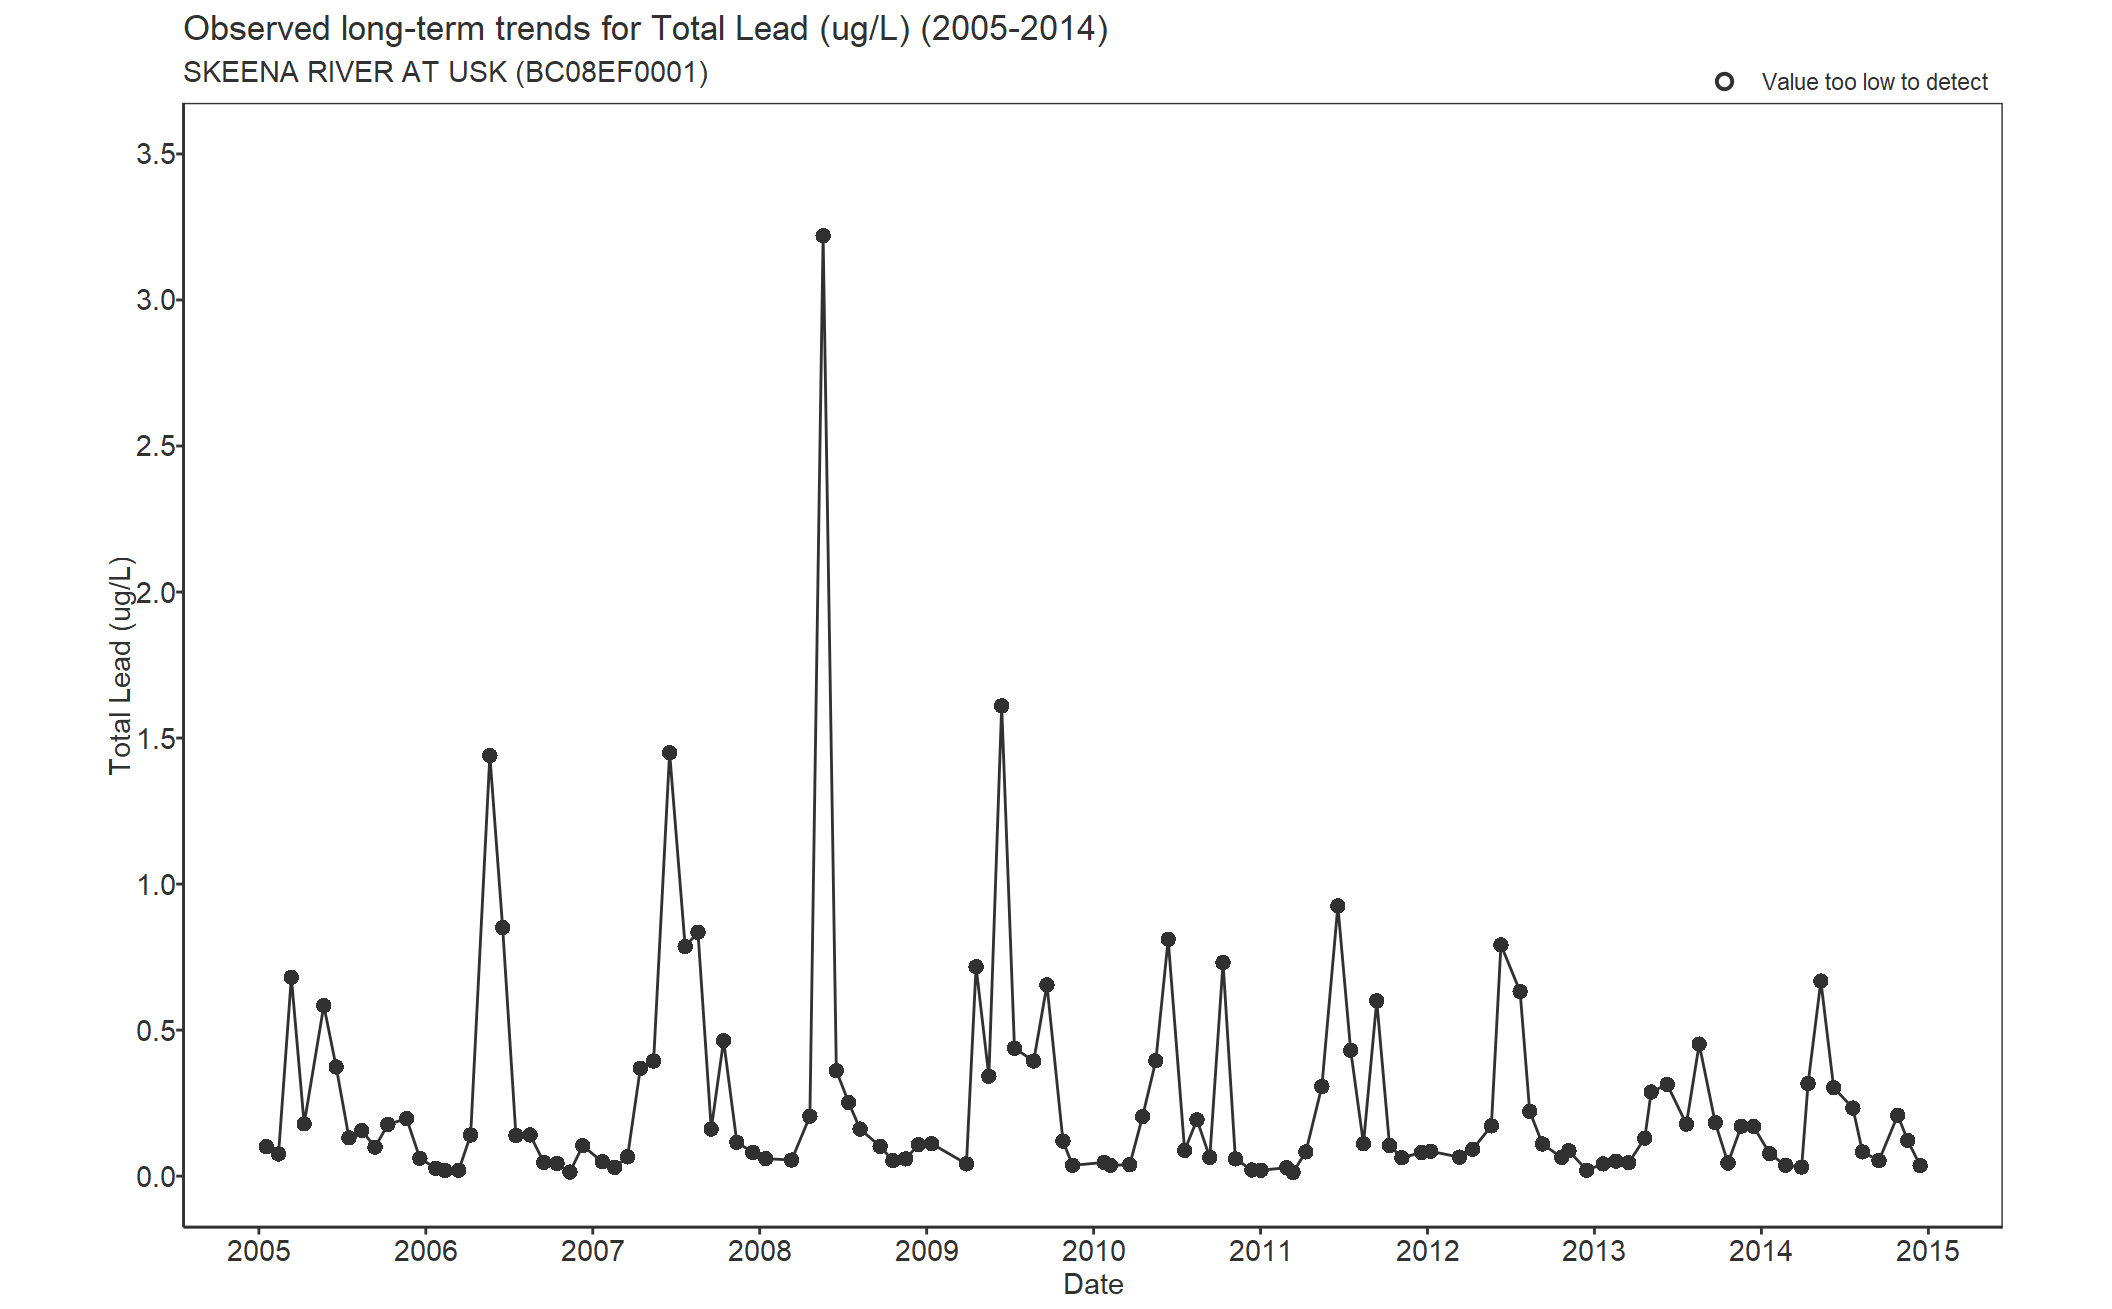 Observed long-term trends for Total Lead (2005-2014)